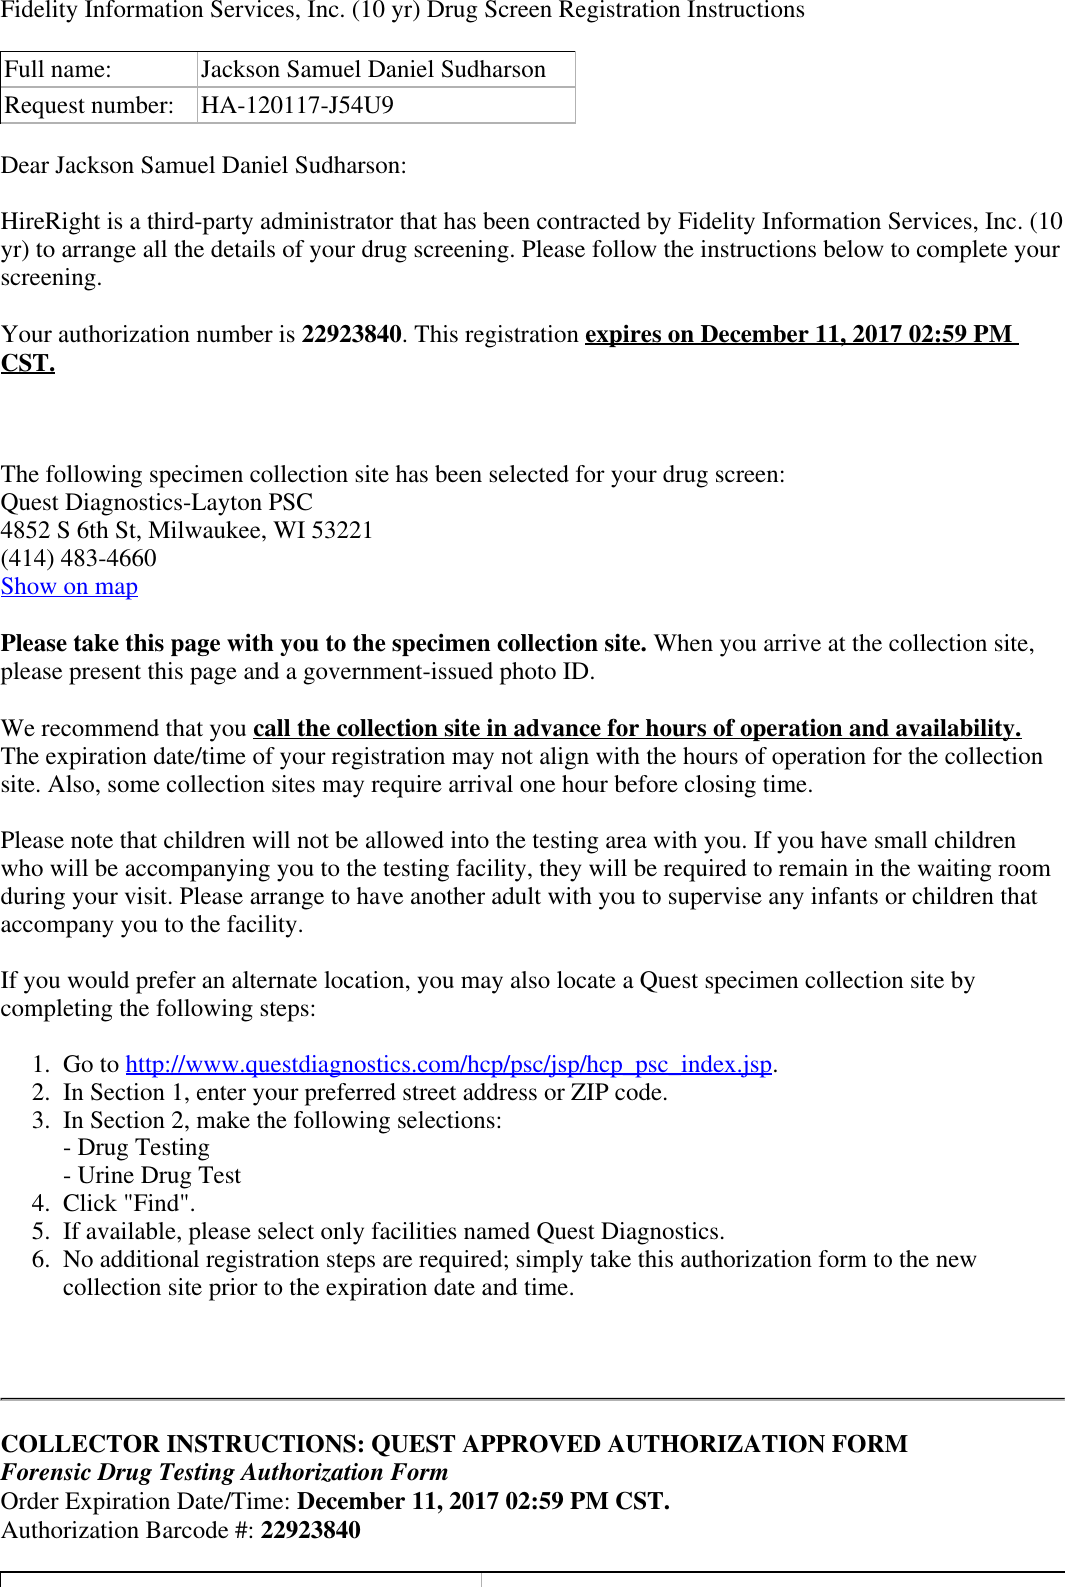 Page 1 of 2 - Drug Screen Registration Instructions-21513057848210